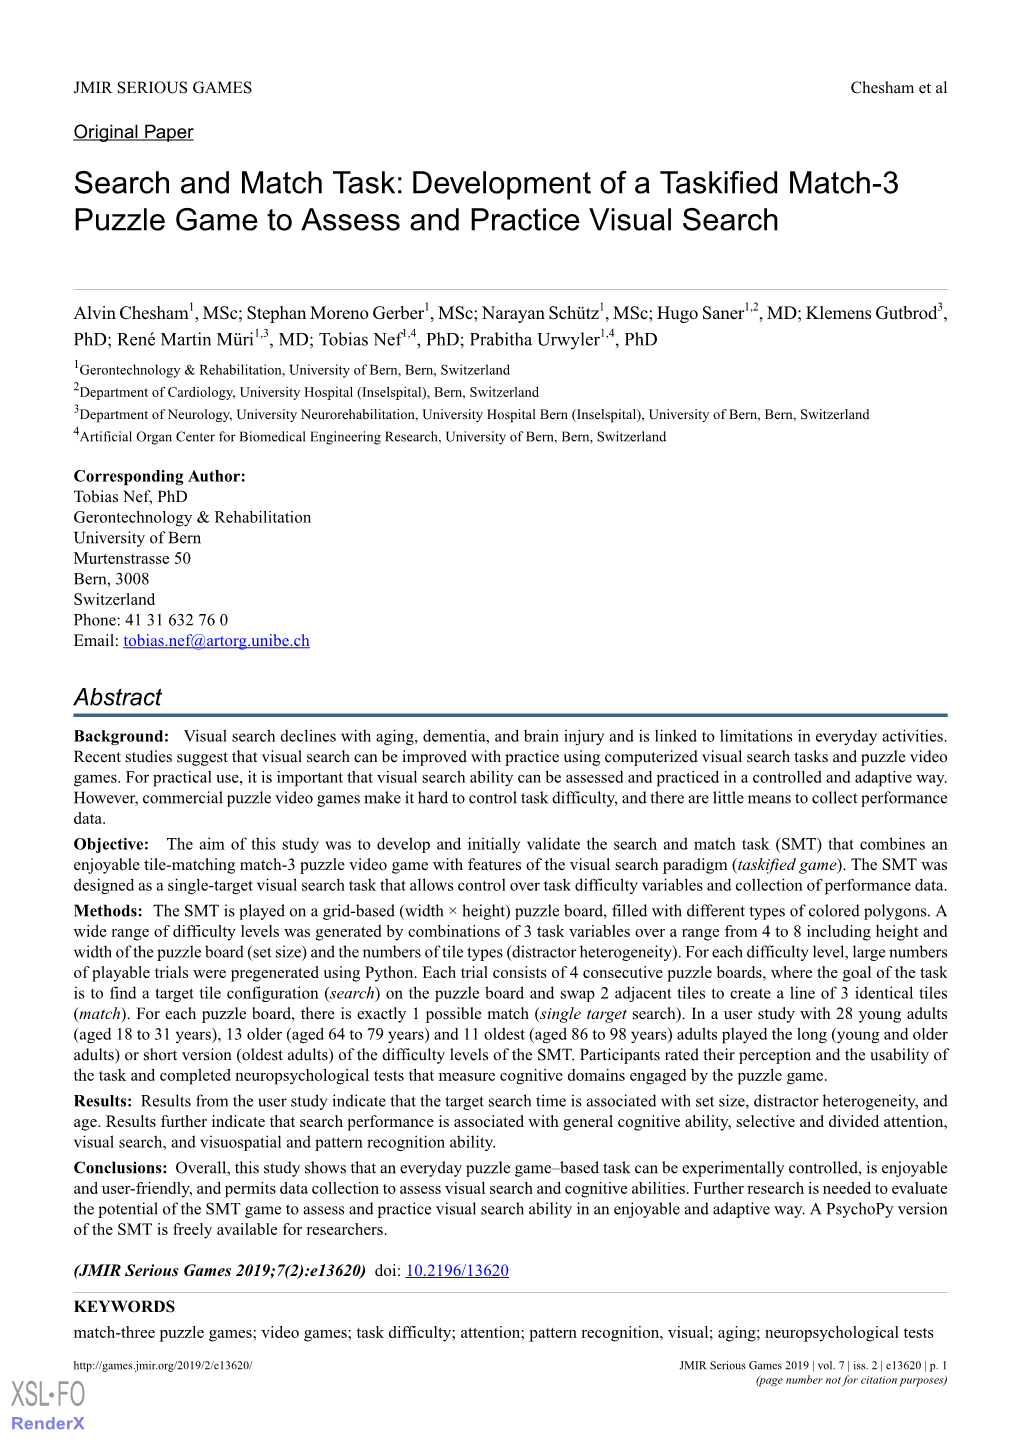 Development of a Taskified Match-3 Puzzle Game to Assess and Practice Visual Search